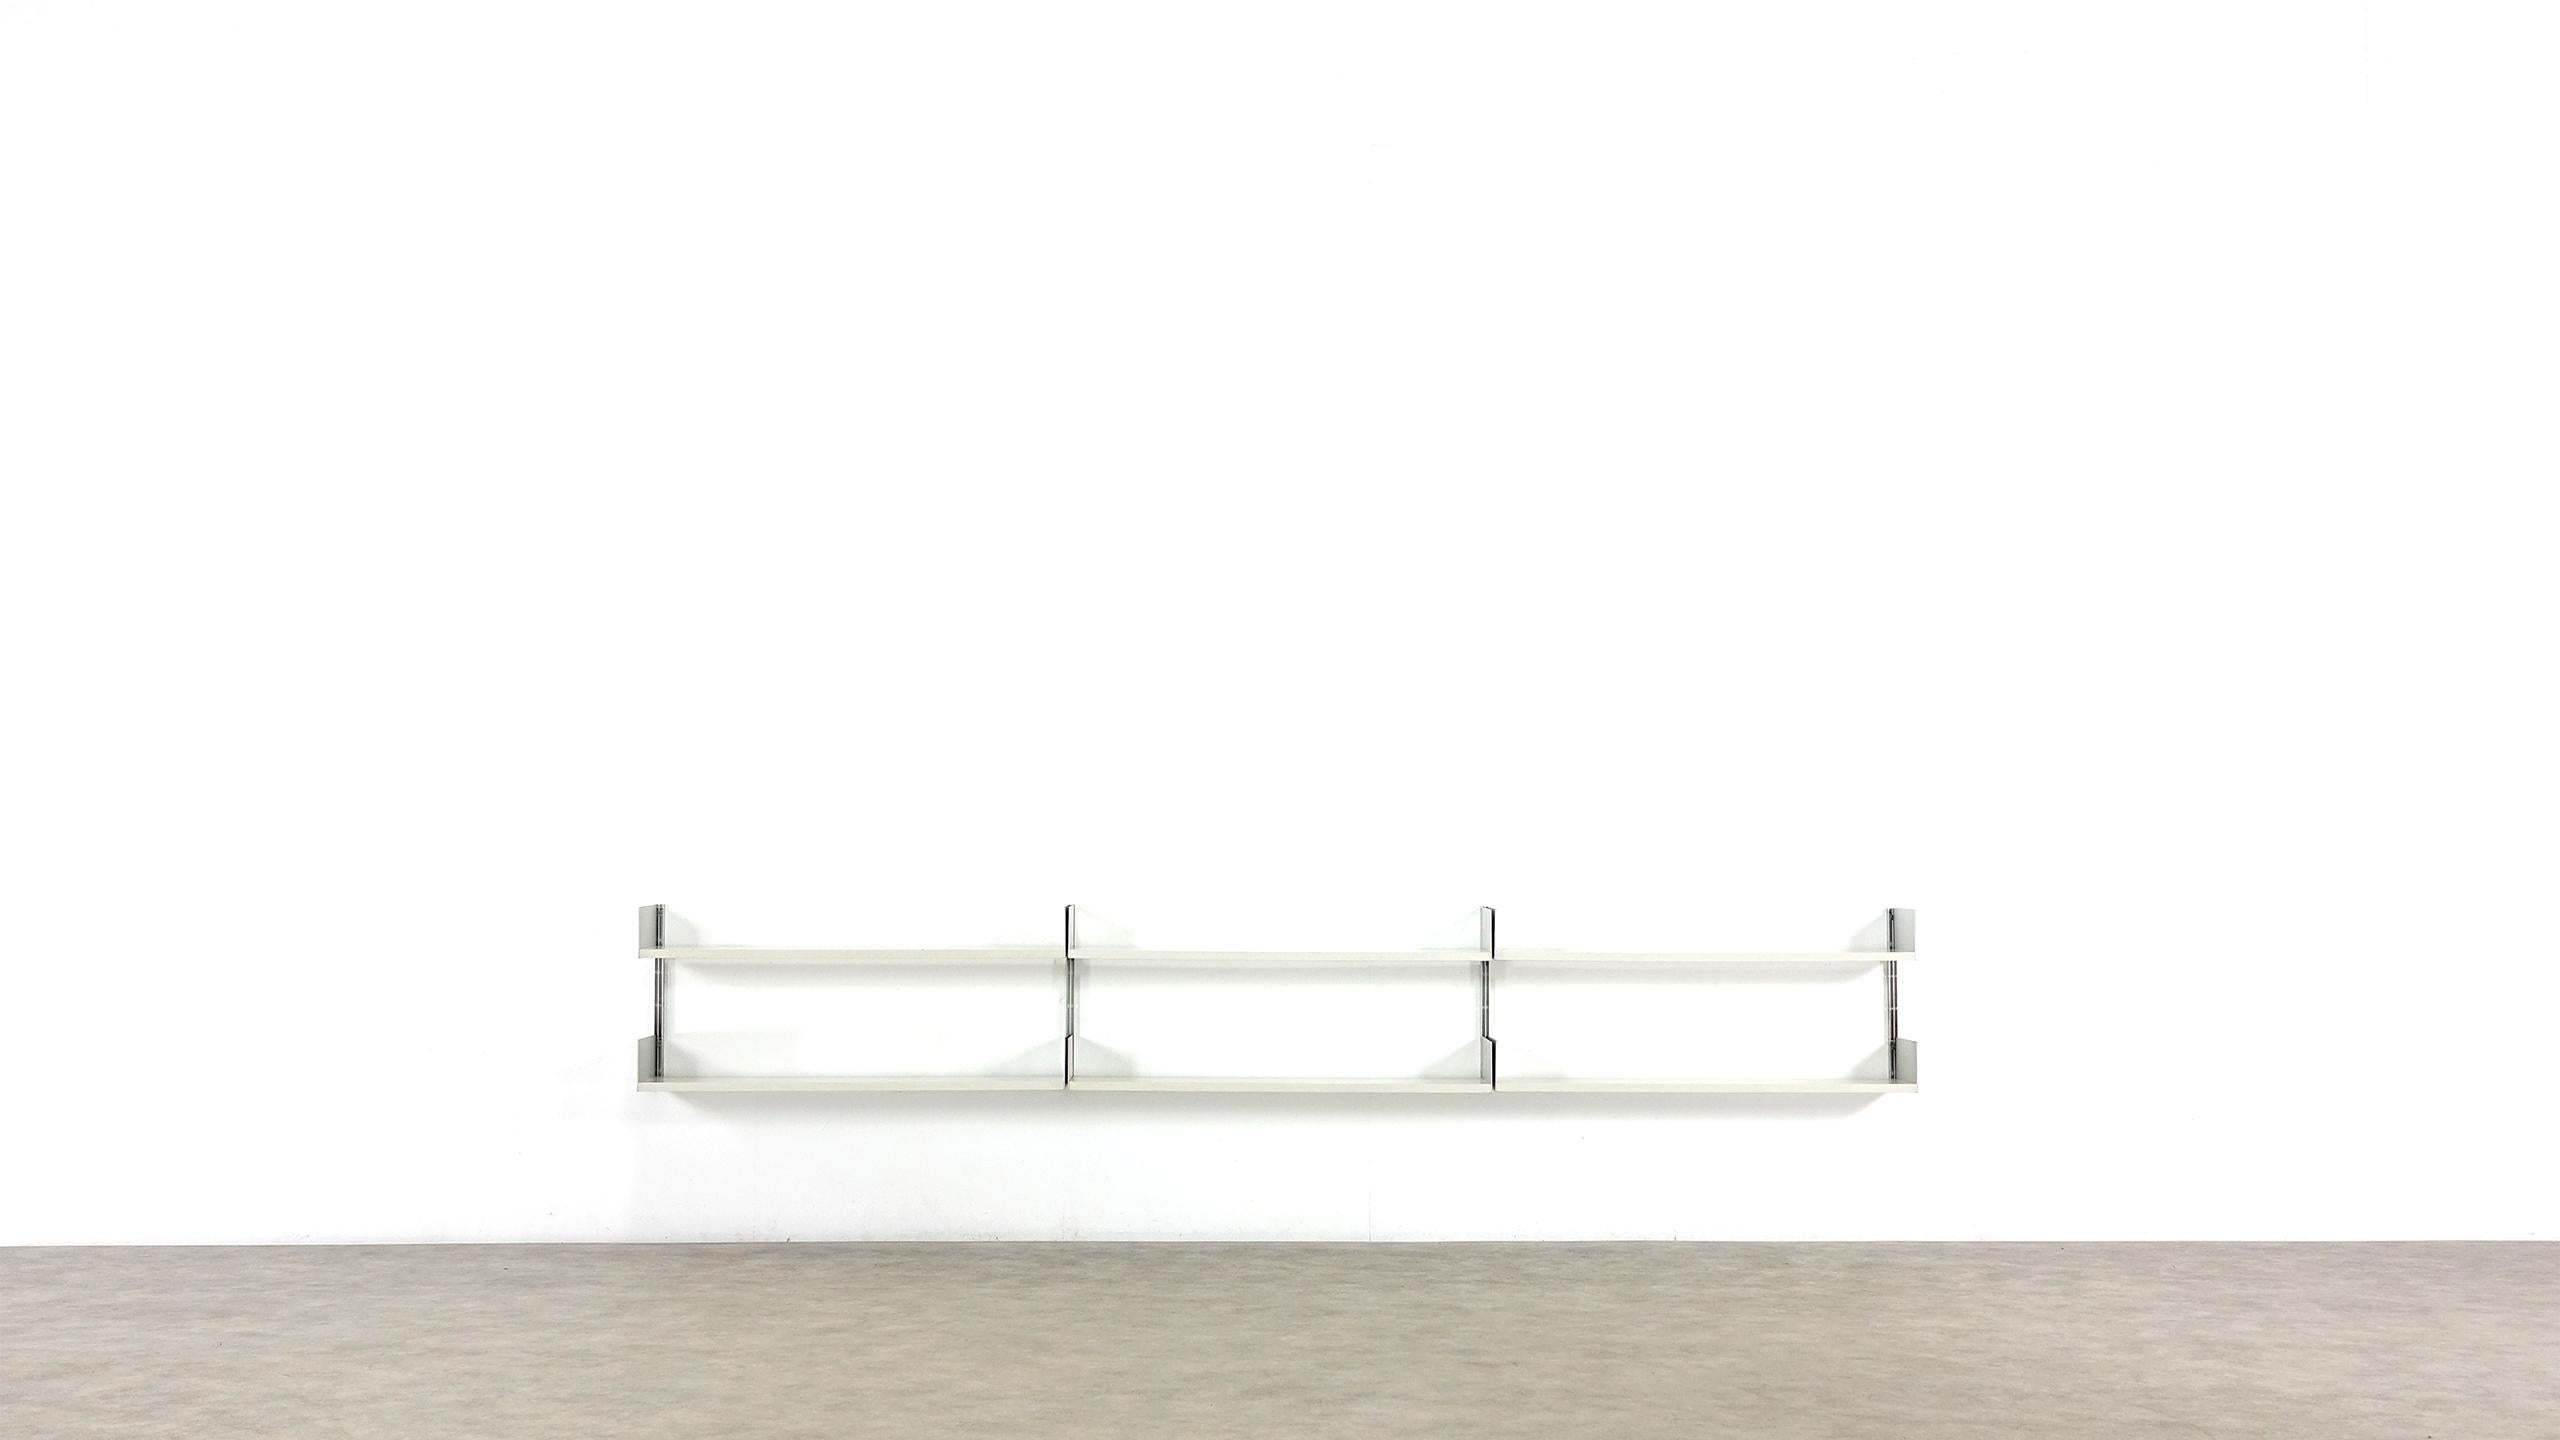 Aluminum Dieter Rams Sideboard 606 Universal Shelving System for Vitsœ, Germany, 1965